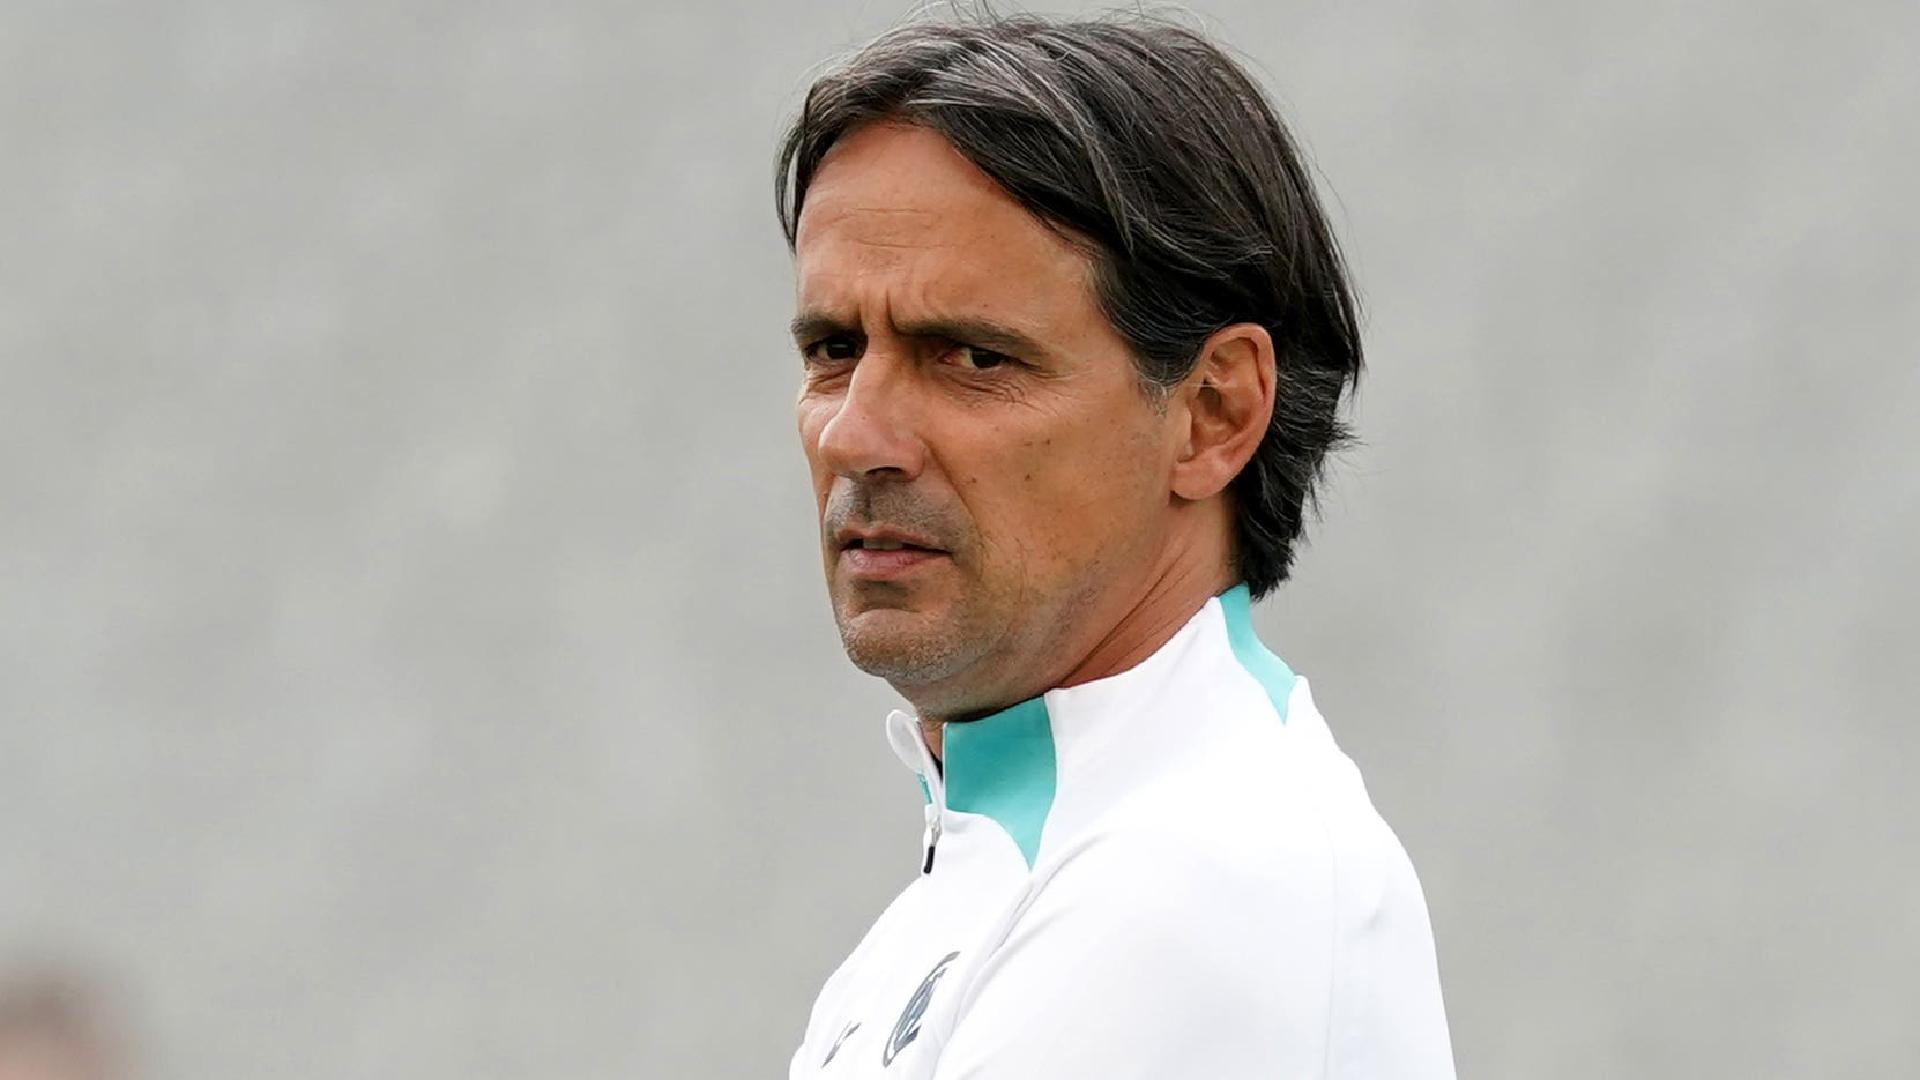 Simone Inzaghi won’t let standards slip at Serie A leaders Inter Milan